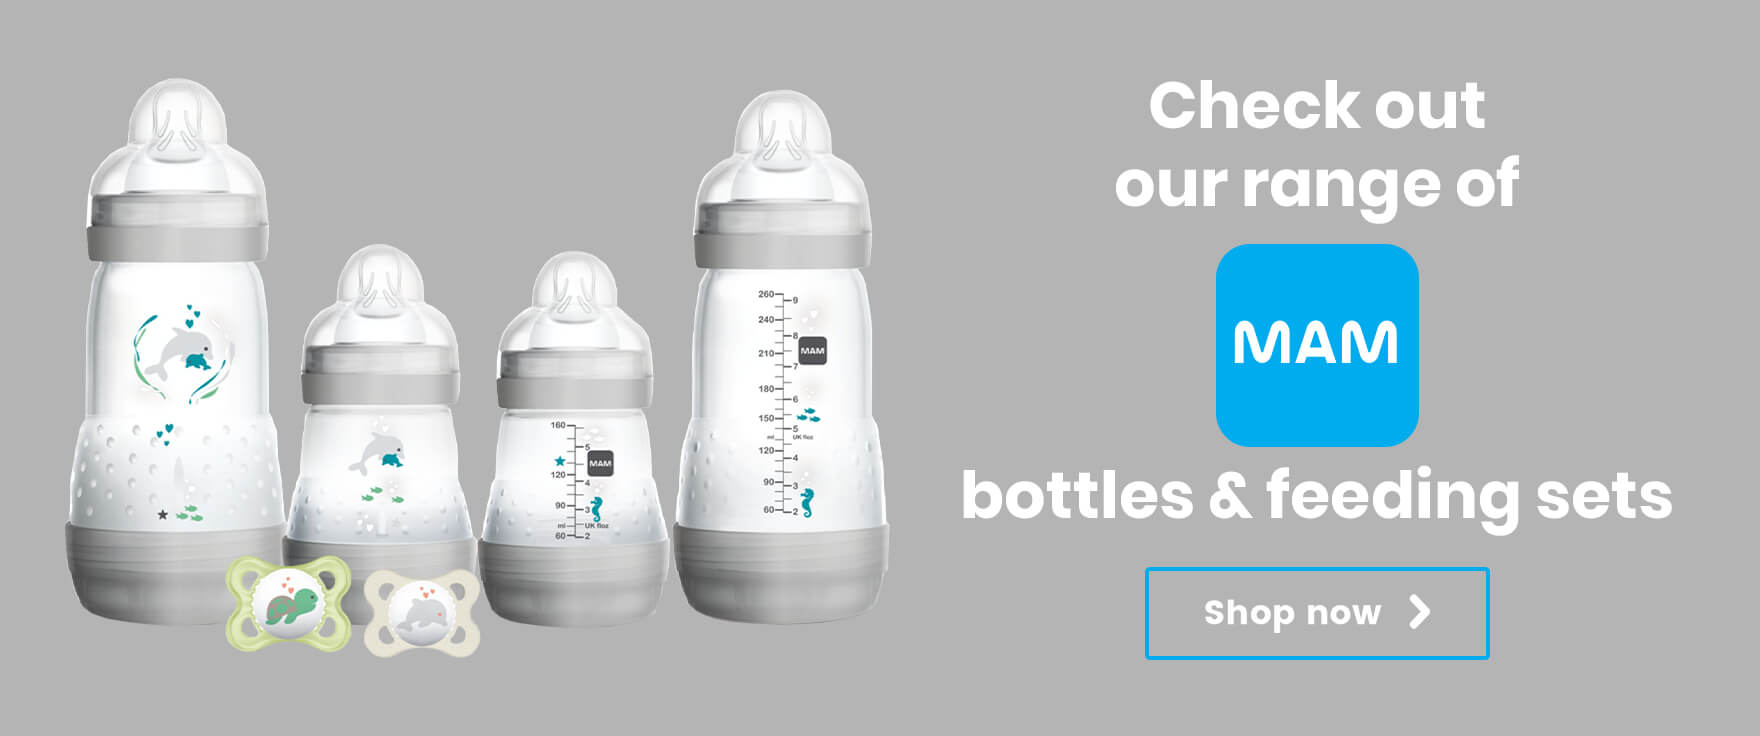 Check out our range of MAM bottles and feeding sets